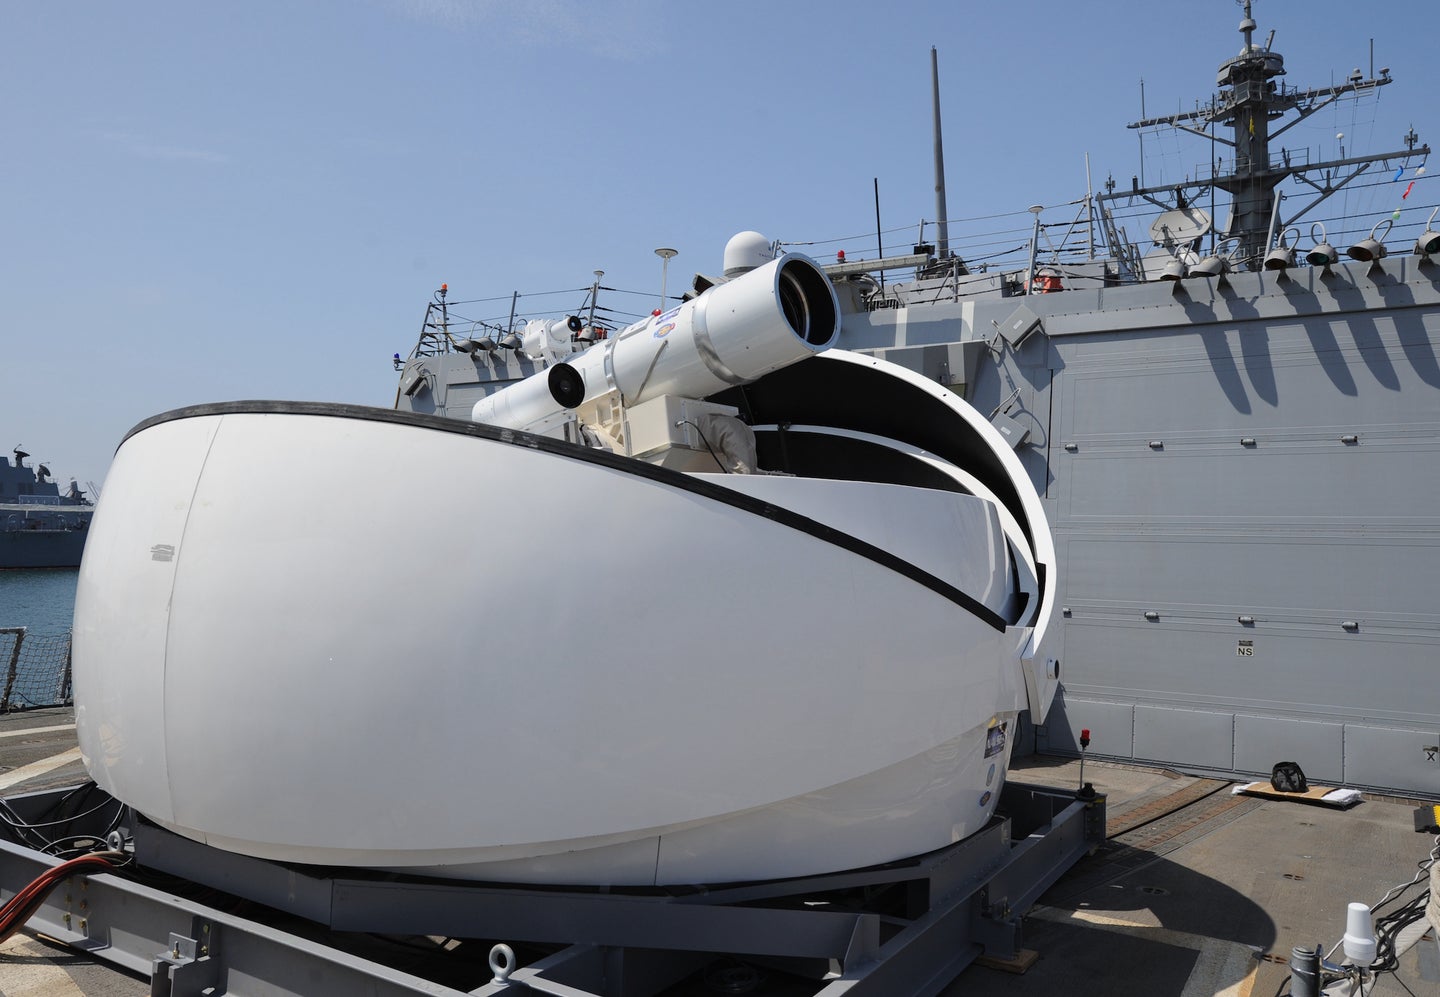 A US laser weapon system in 2012 on a destroyer.